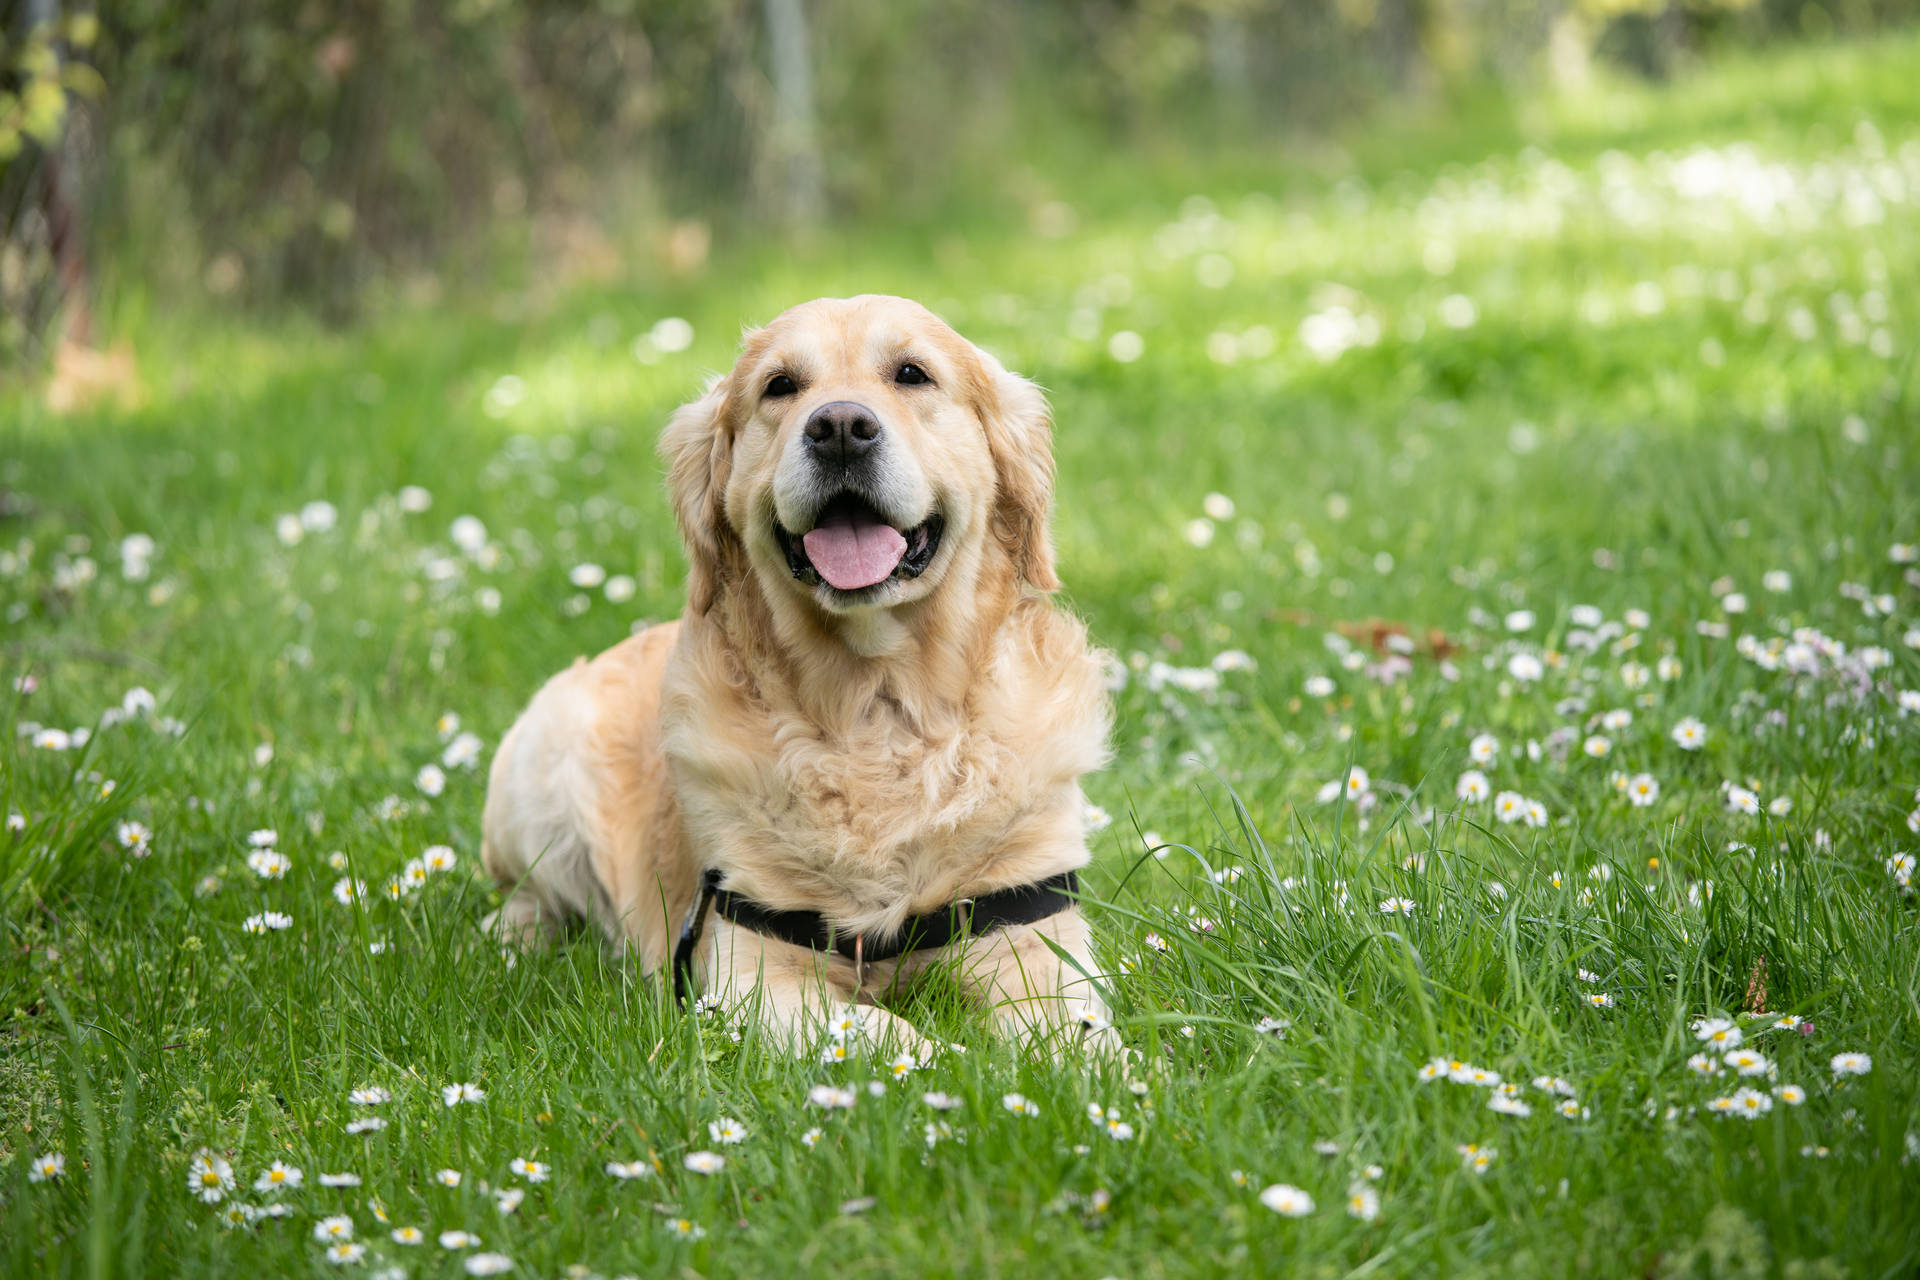 Beige dog sticking its tongue out on grass field wallpaper.